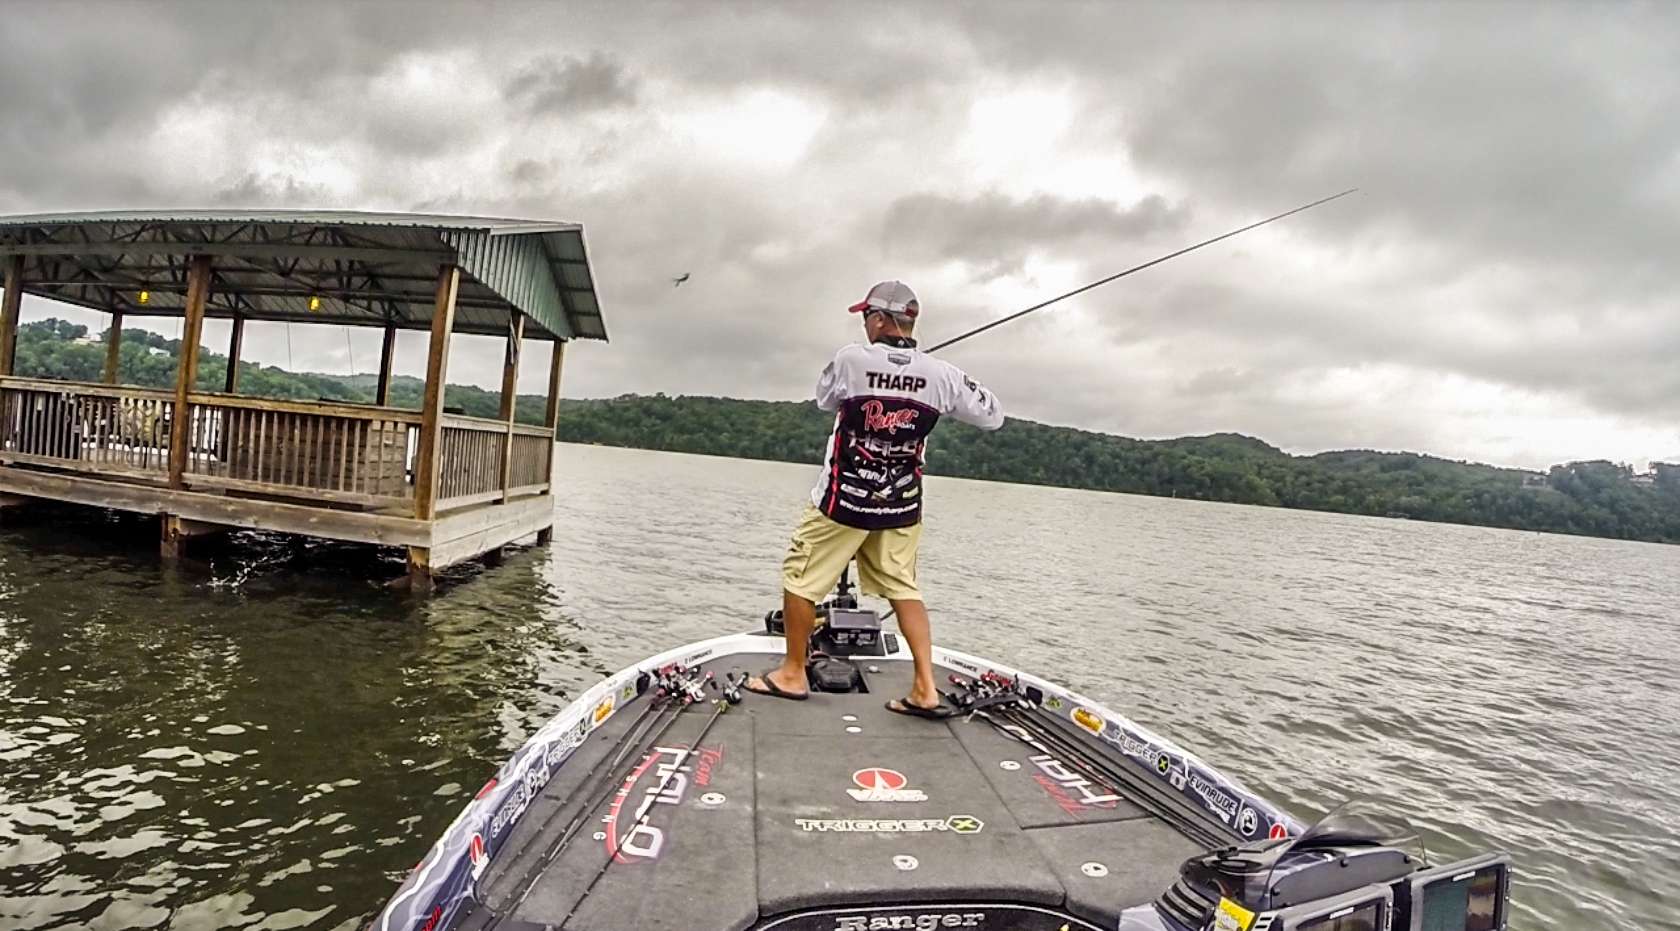 Randall Tharp lays into one only to have his jig come flying out of water as the fish pulls free.